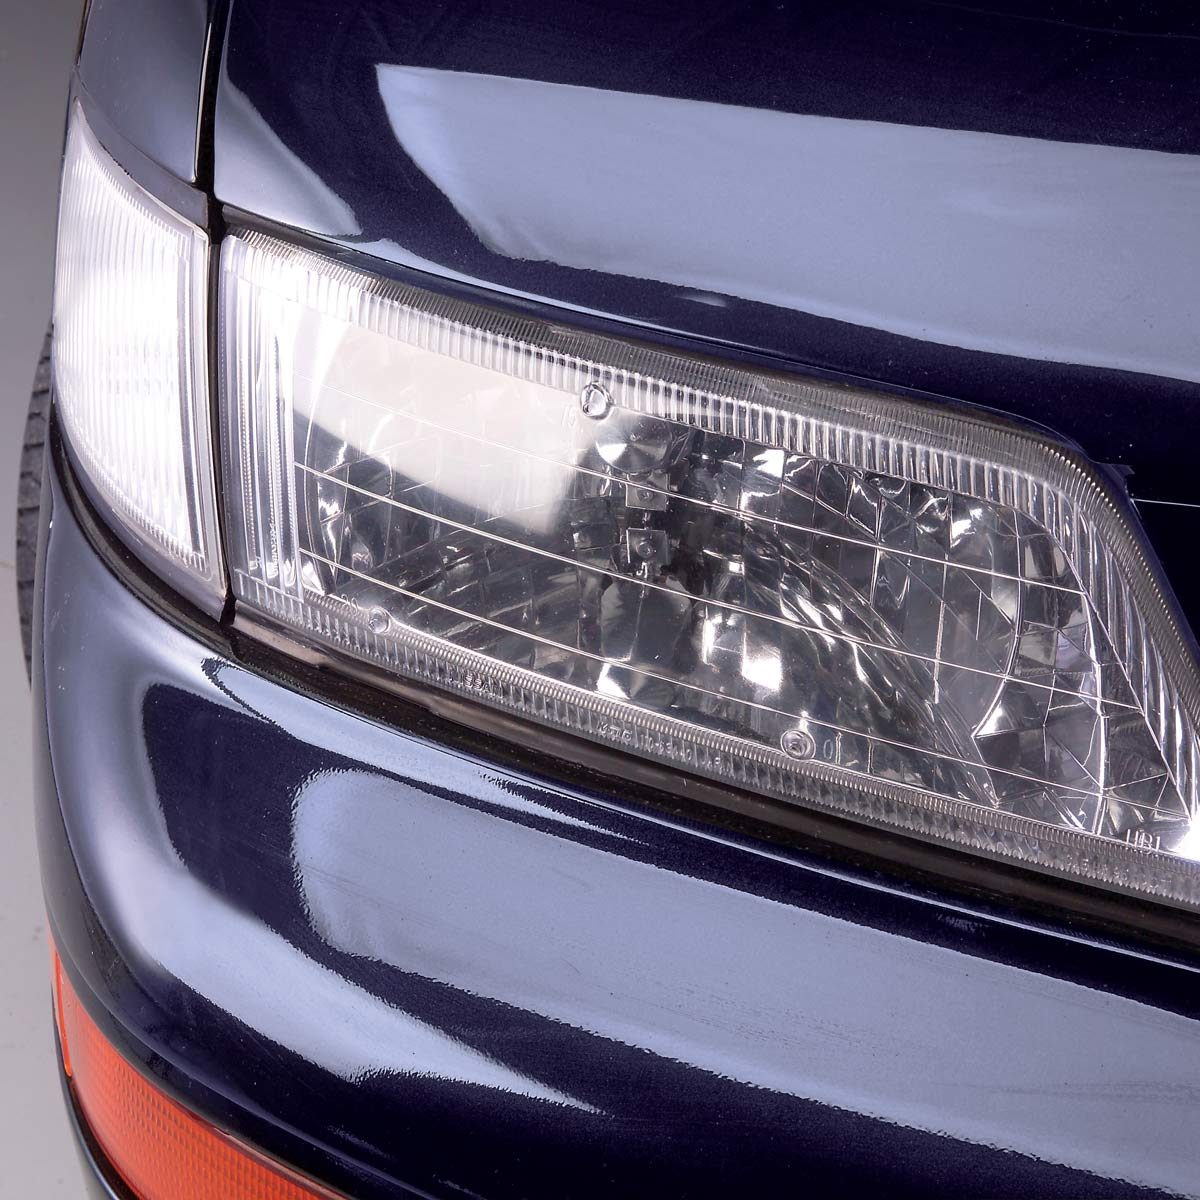 Headlight concept using only one plastic material